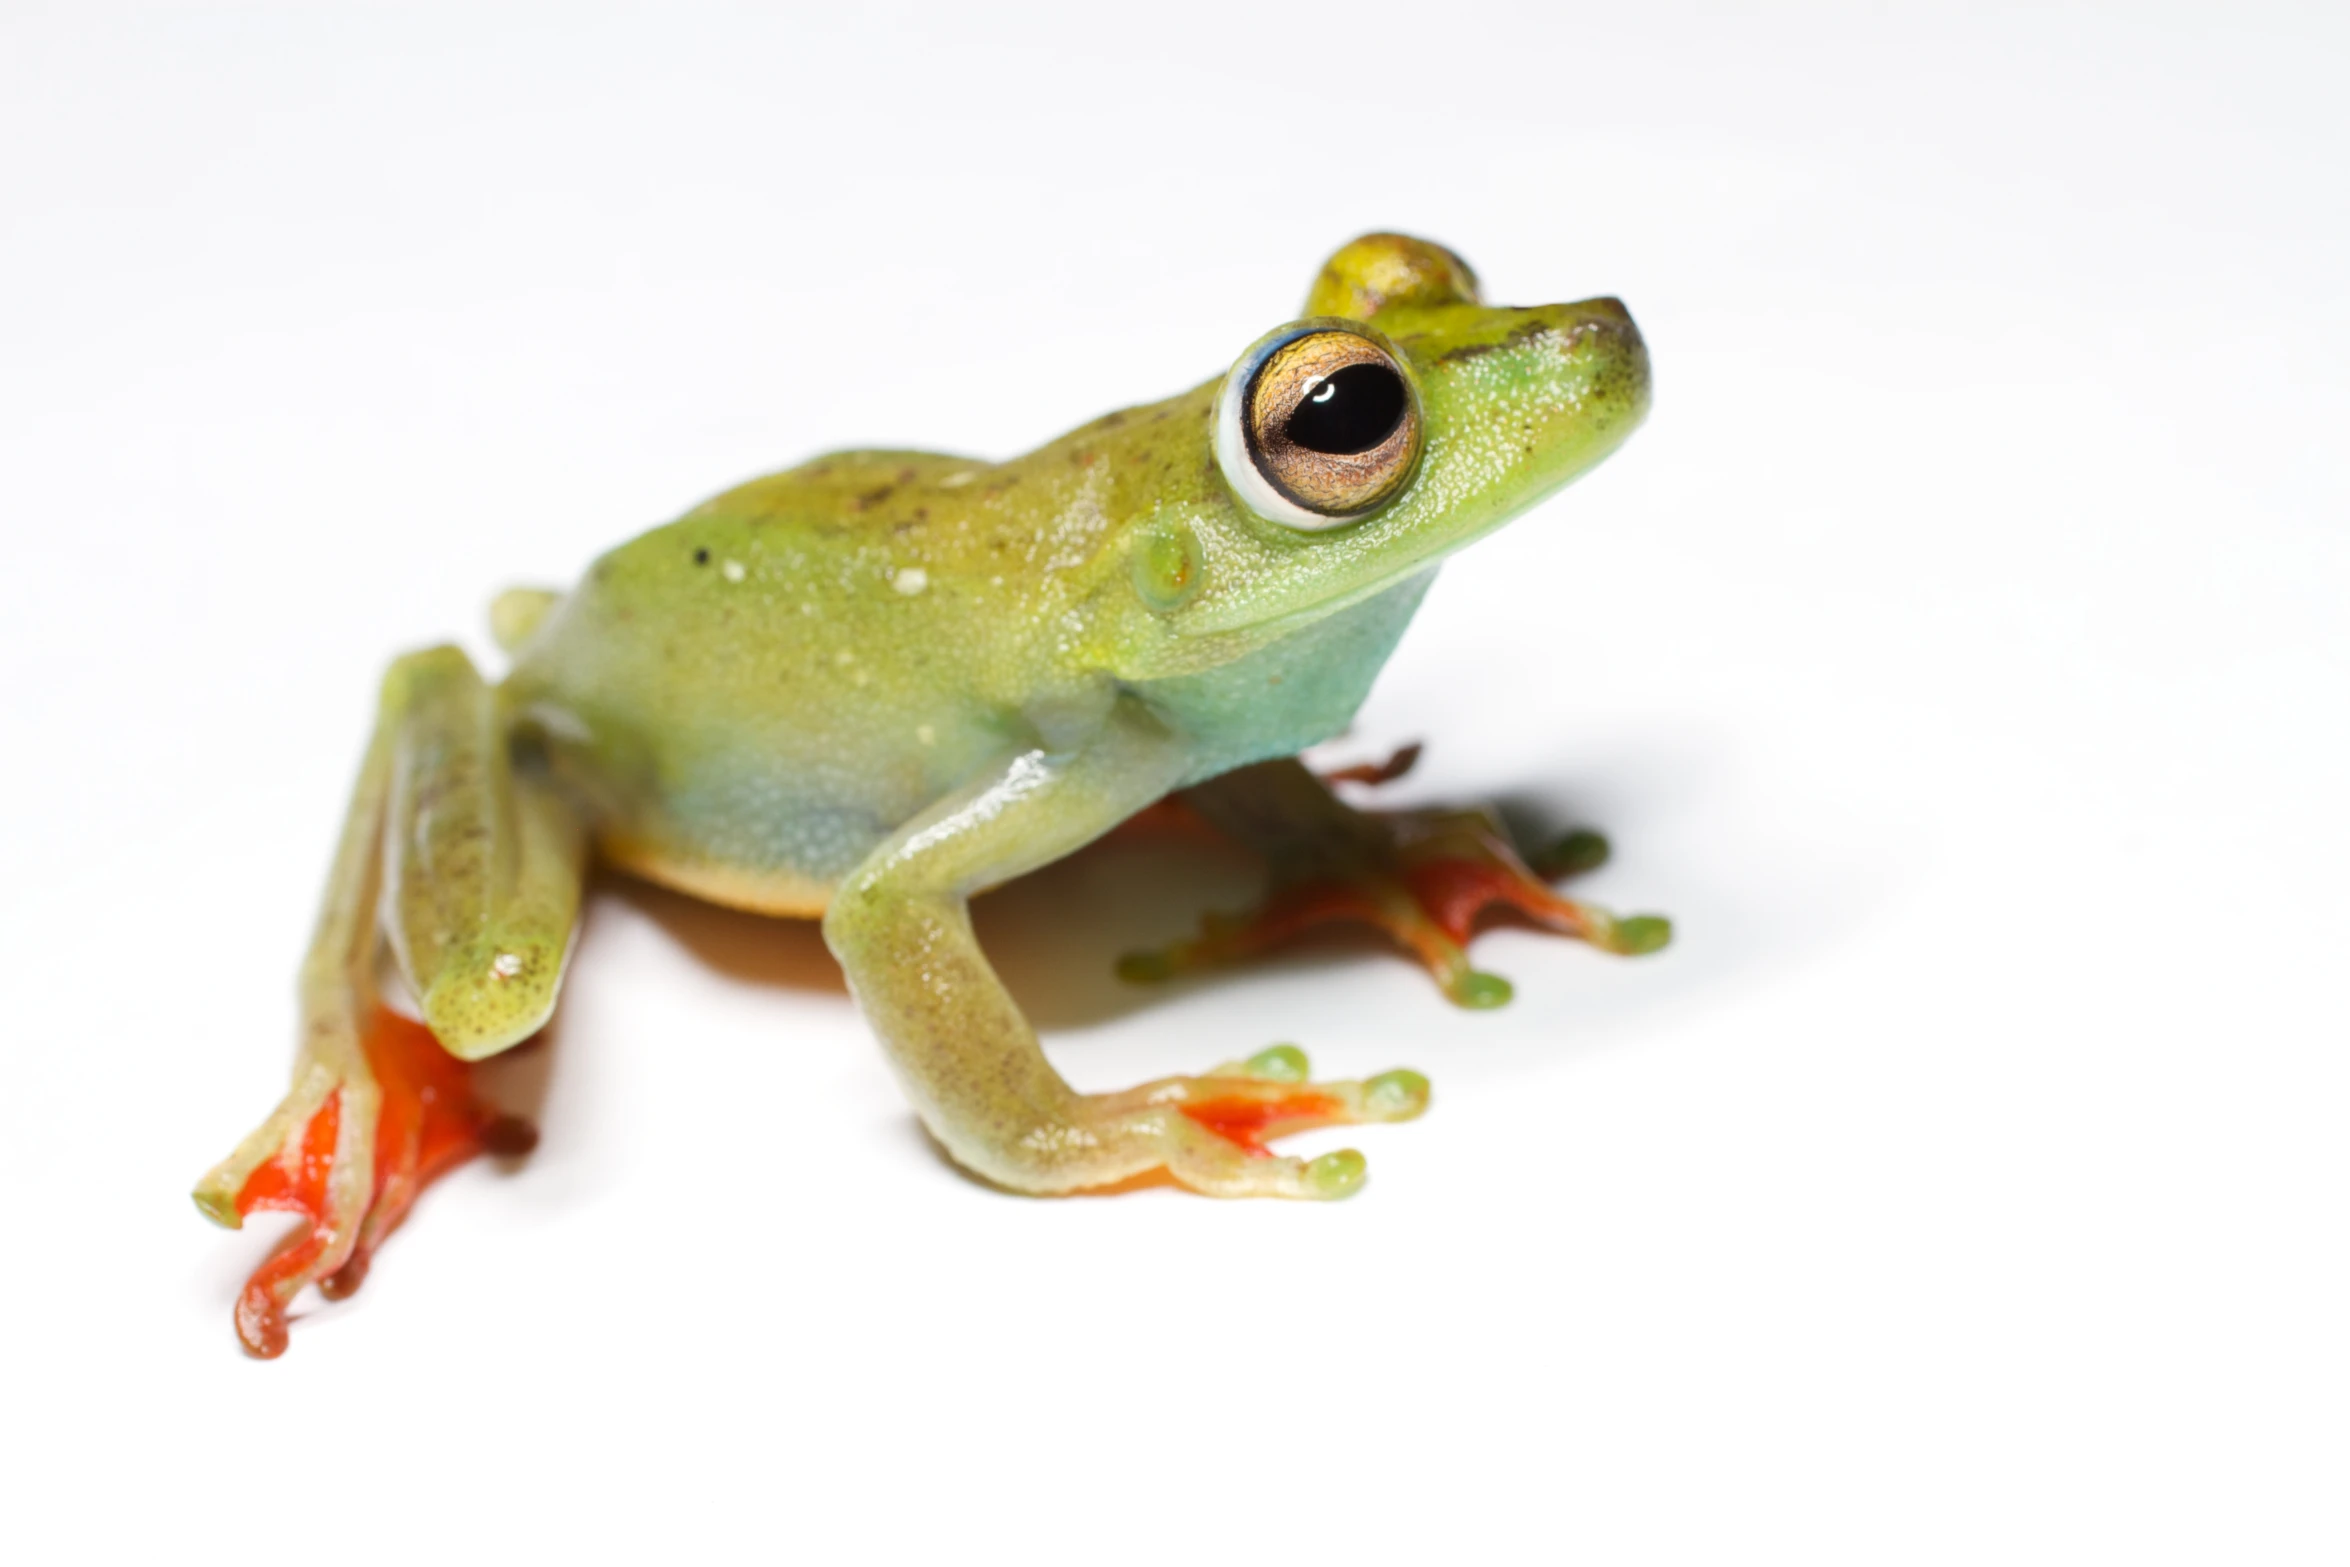 the frog is green and has orange legs